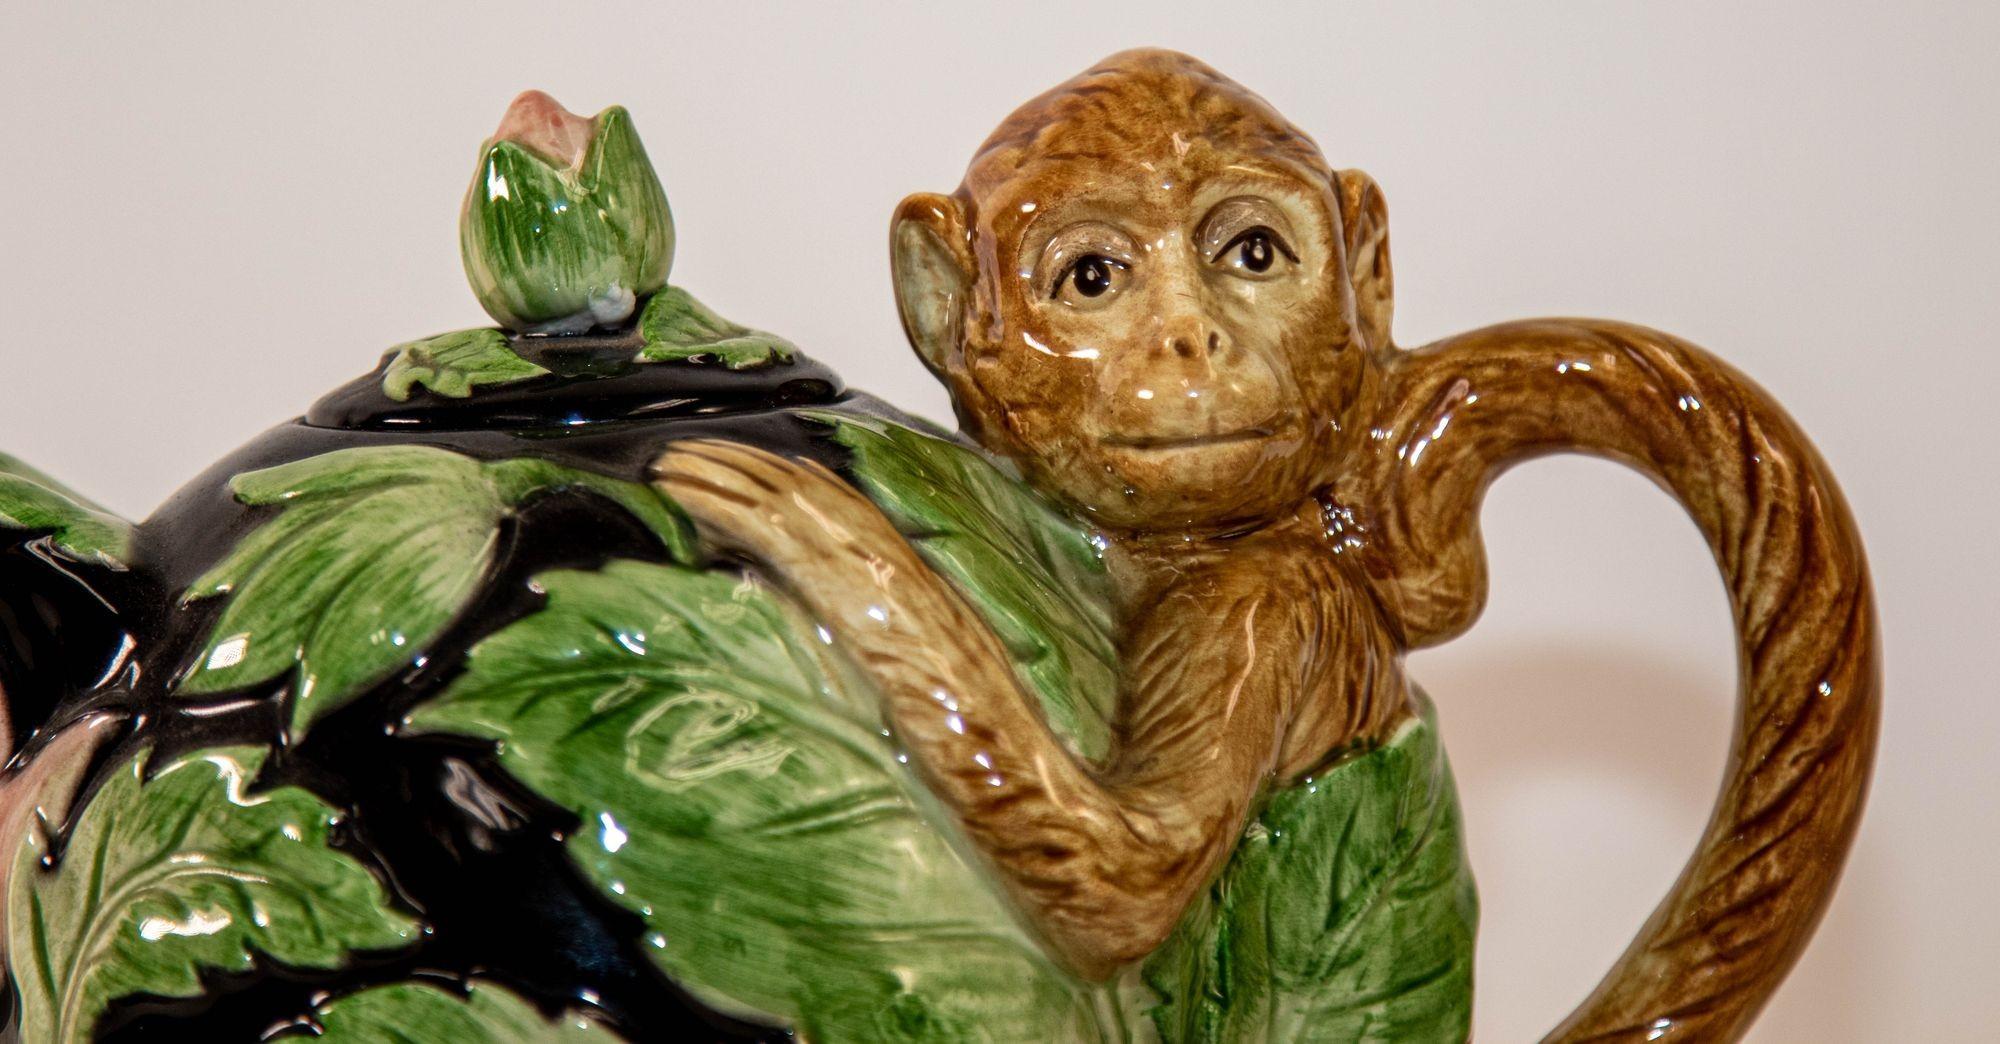 Vintage Fitz and Floyd Rain Forest Monkey Majolica ceramic Teapot.
Vintage Majolica Monkey Fitz and Floyd 1980s Rain Forest Teapot.
Designed as a whimsical monkey ceramic teapot in the jungle with palm leaves, pink flowers, the handled formed by the